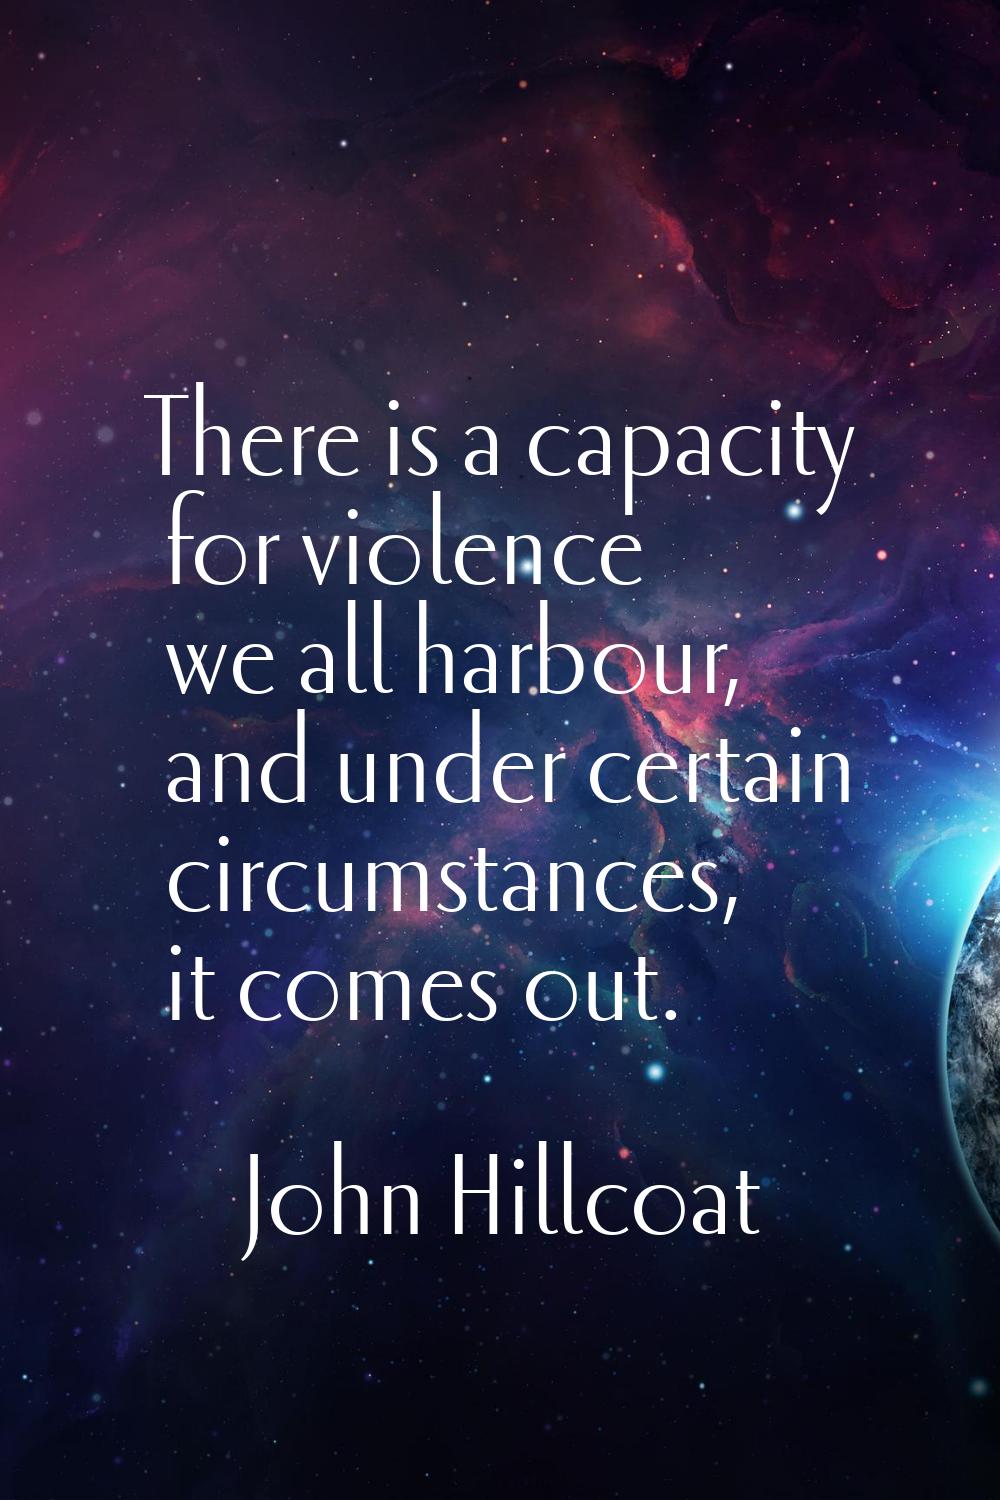 There is a capacity for violence we all harbour, and under certain circumstances, it comes out.